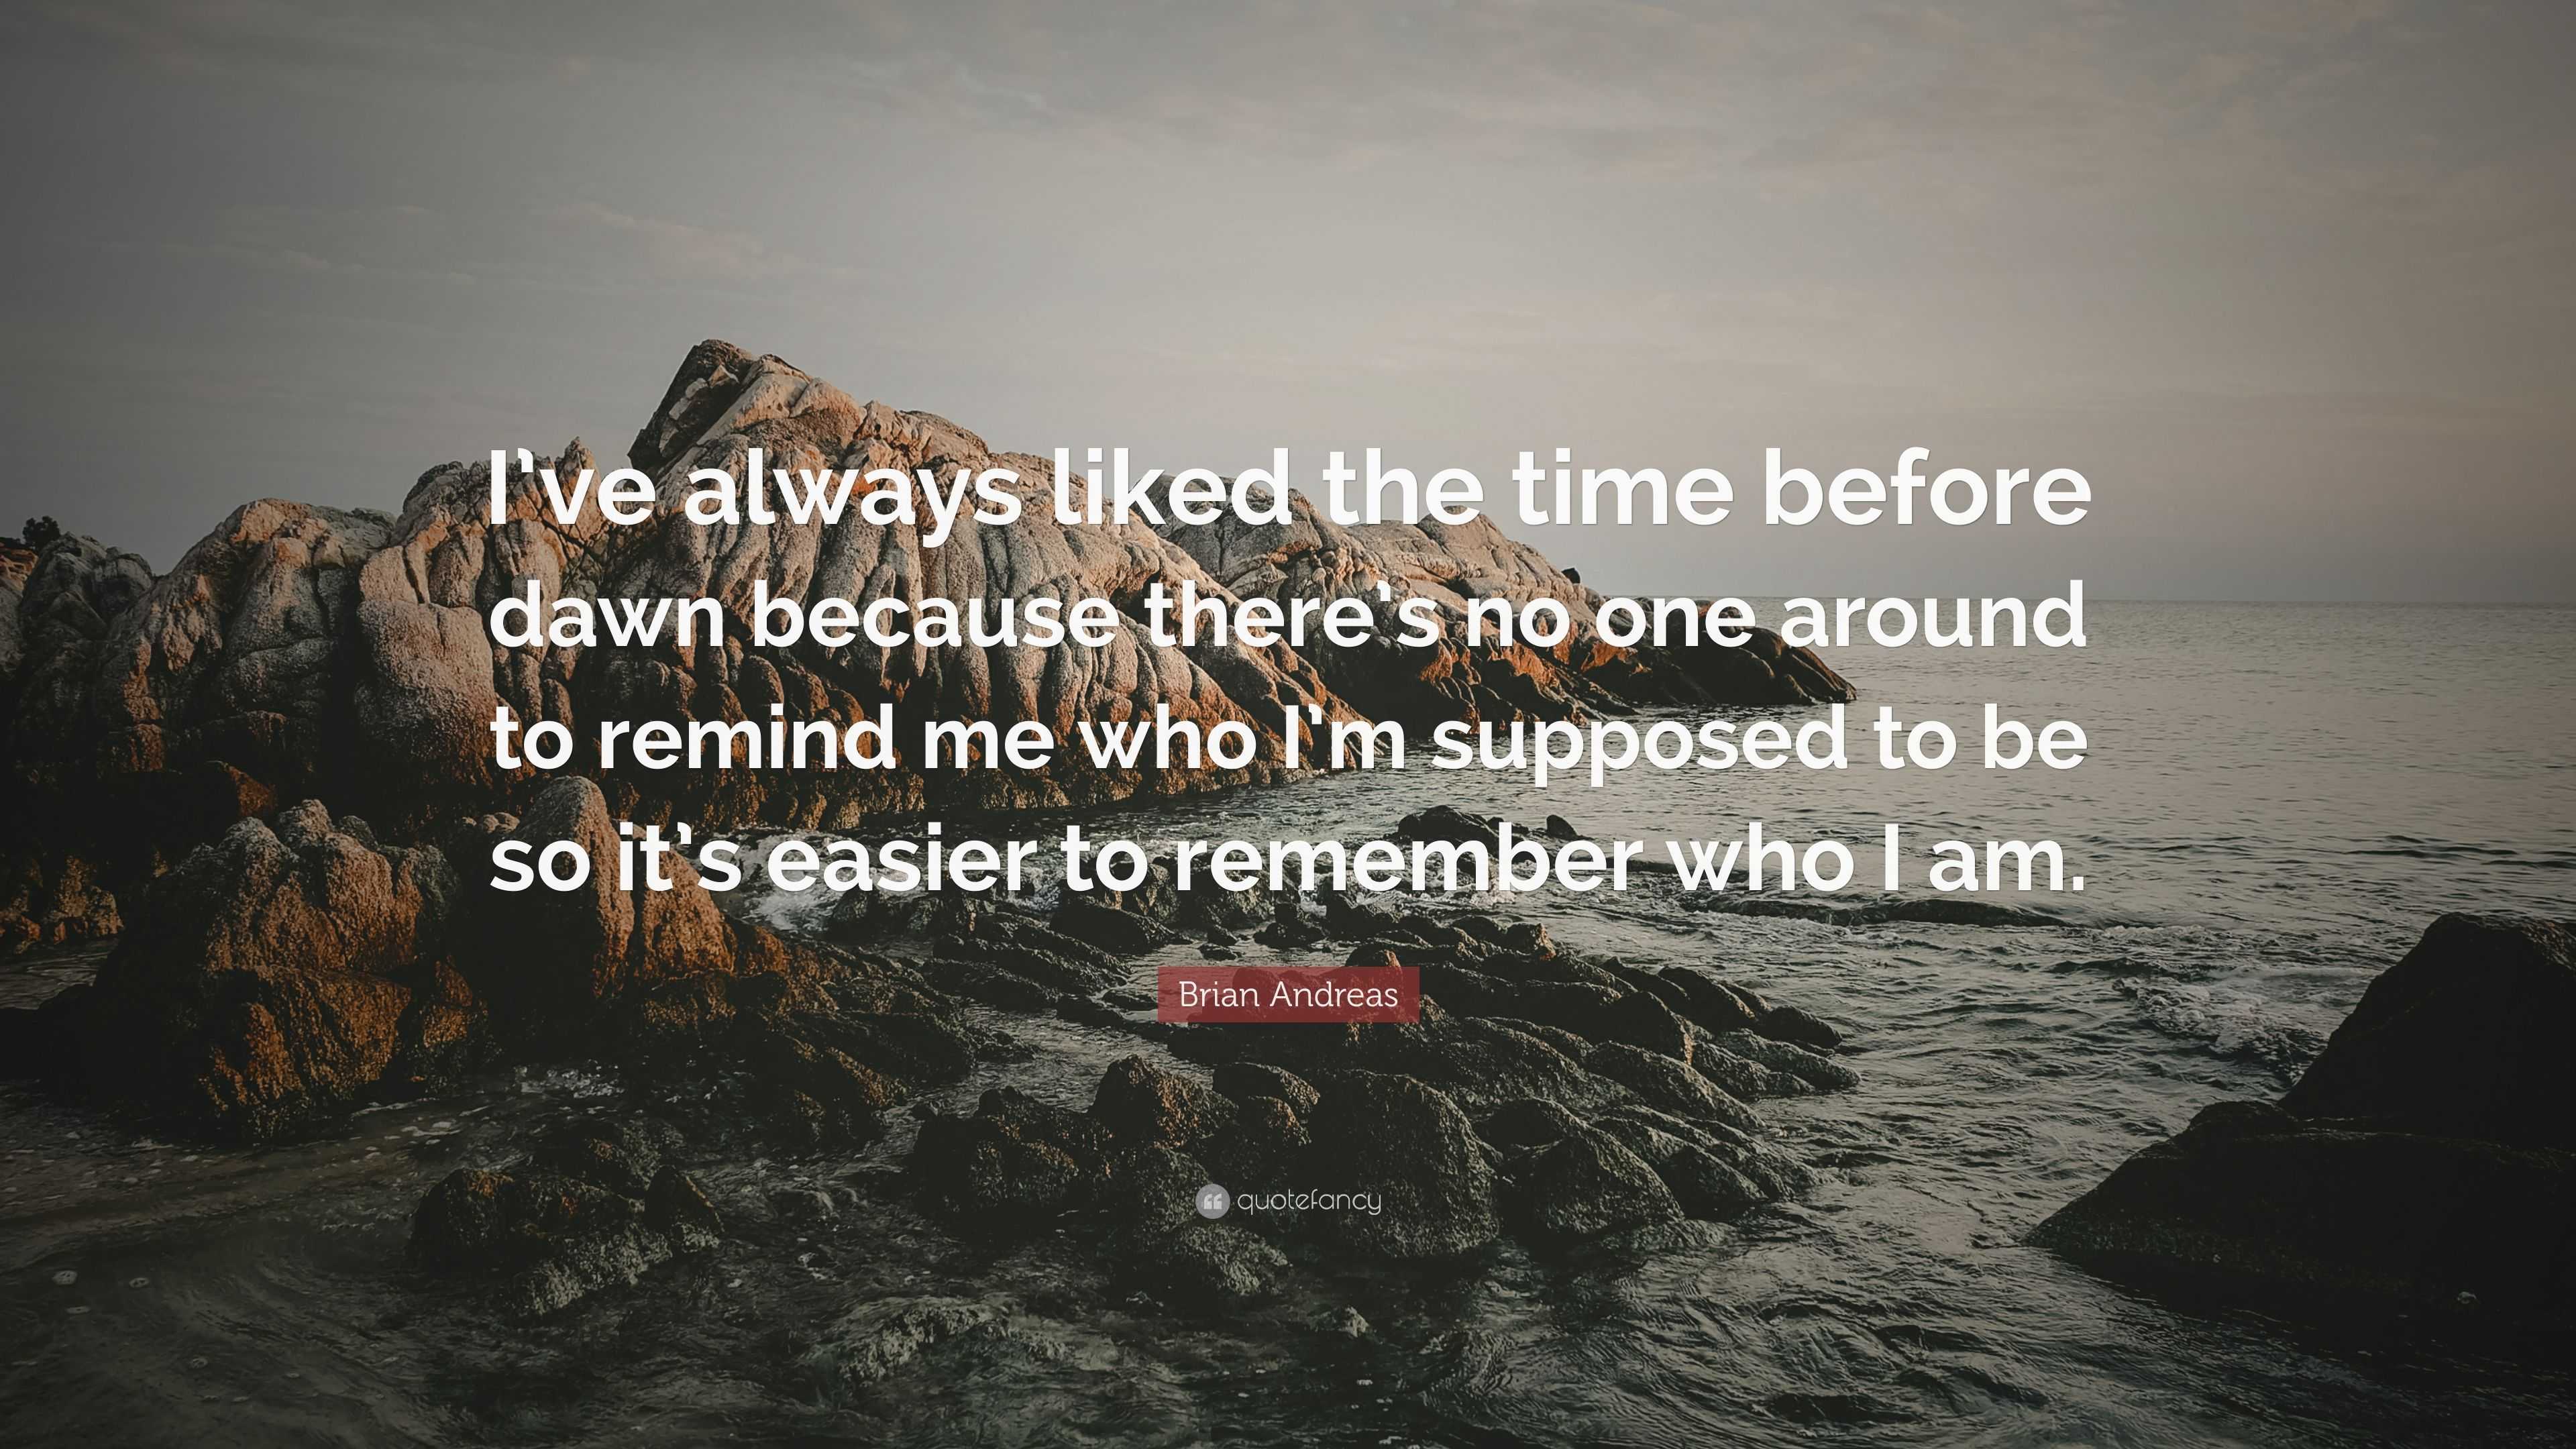 Brian Andreas Quote: “I’ve always liked the time before dawn because ...